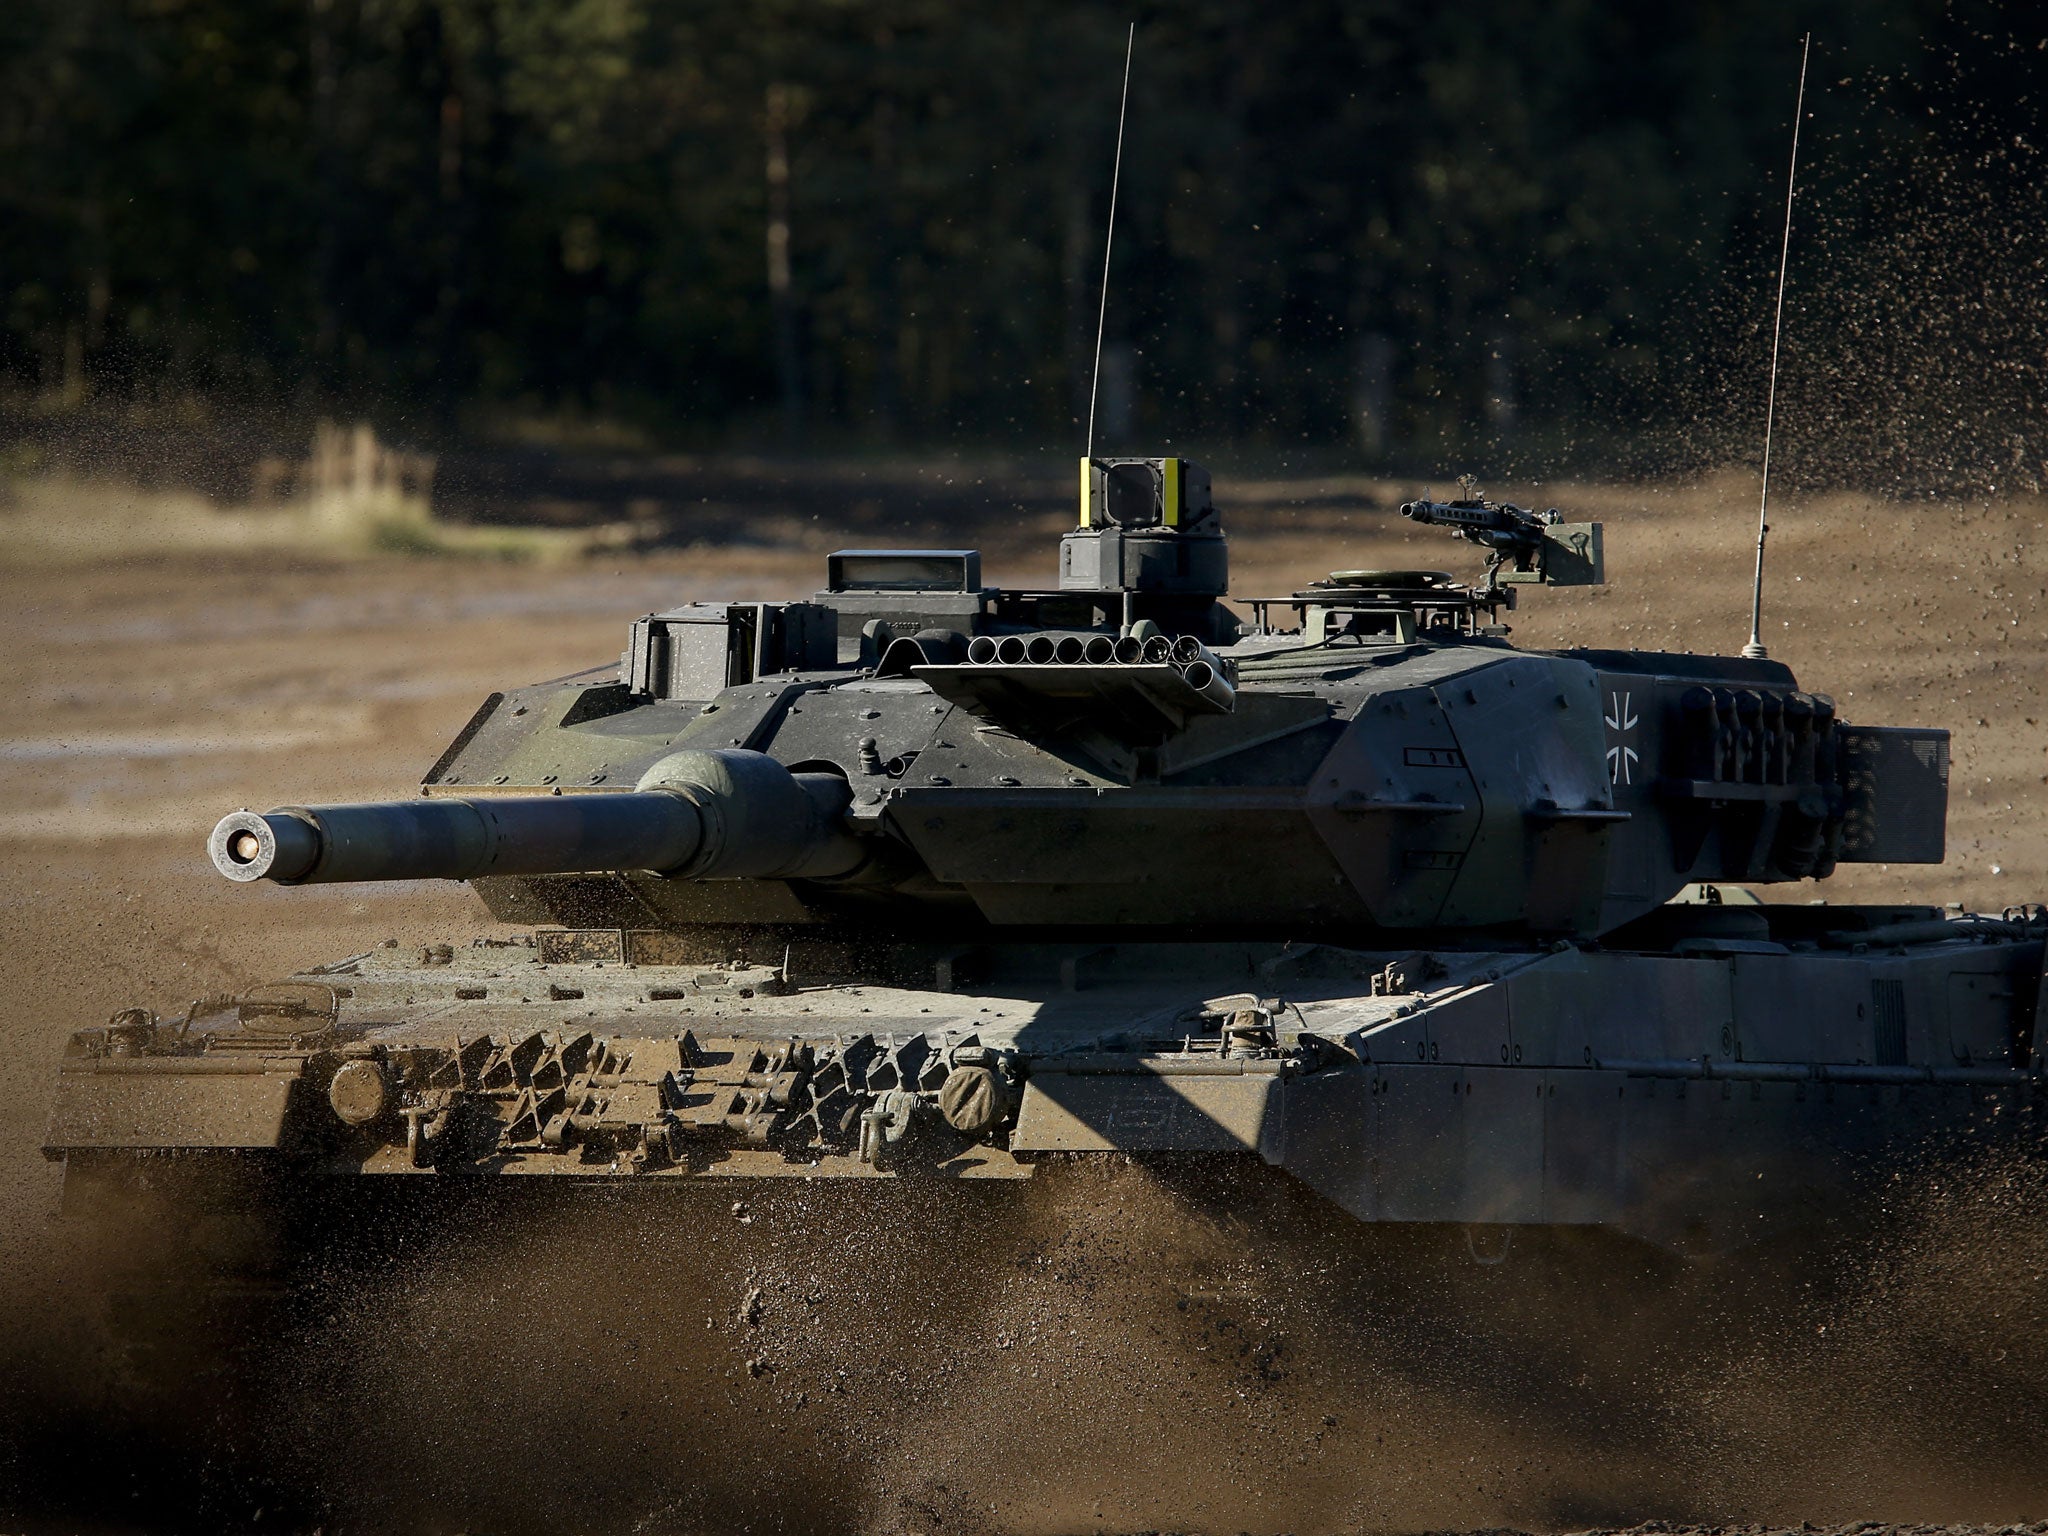 A Leopard 2 tank. A Greek defence official is said to have been bribed to order 170 of them